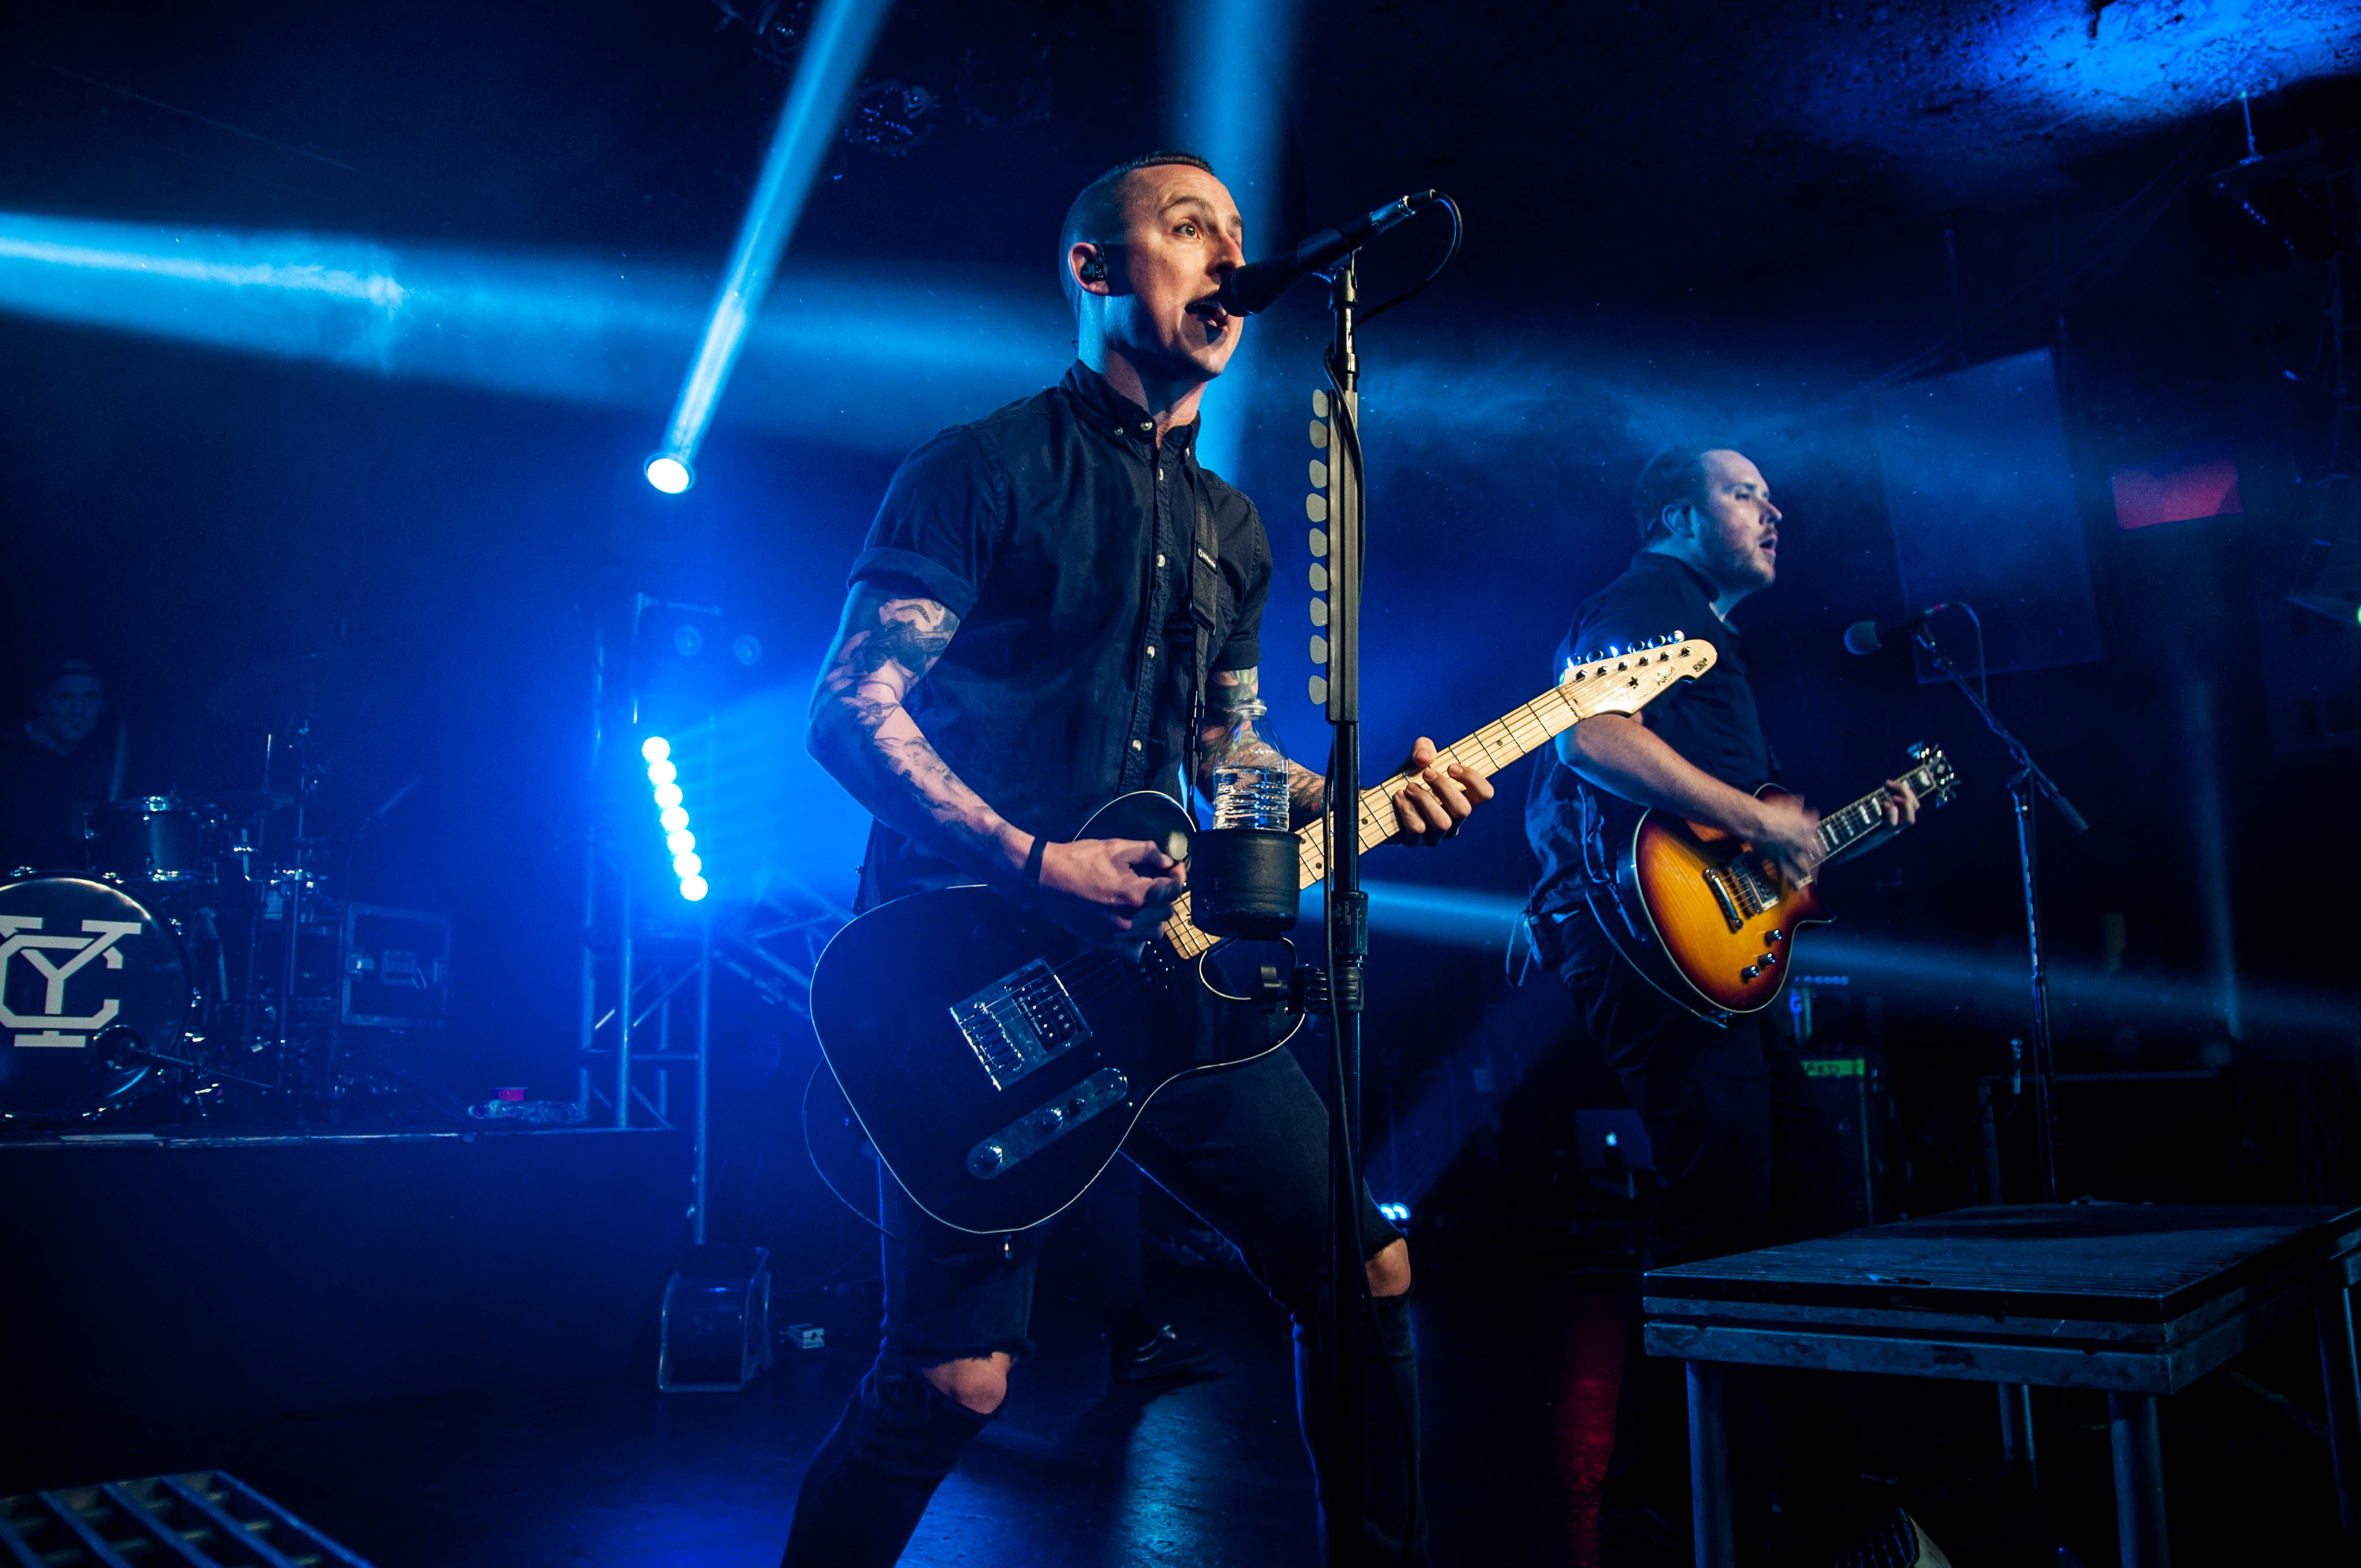 PHOTO GALLERY & REVIEW: A Bittersweet Farewell to Yellowcard in Seattle ...